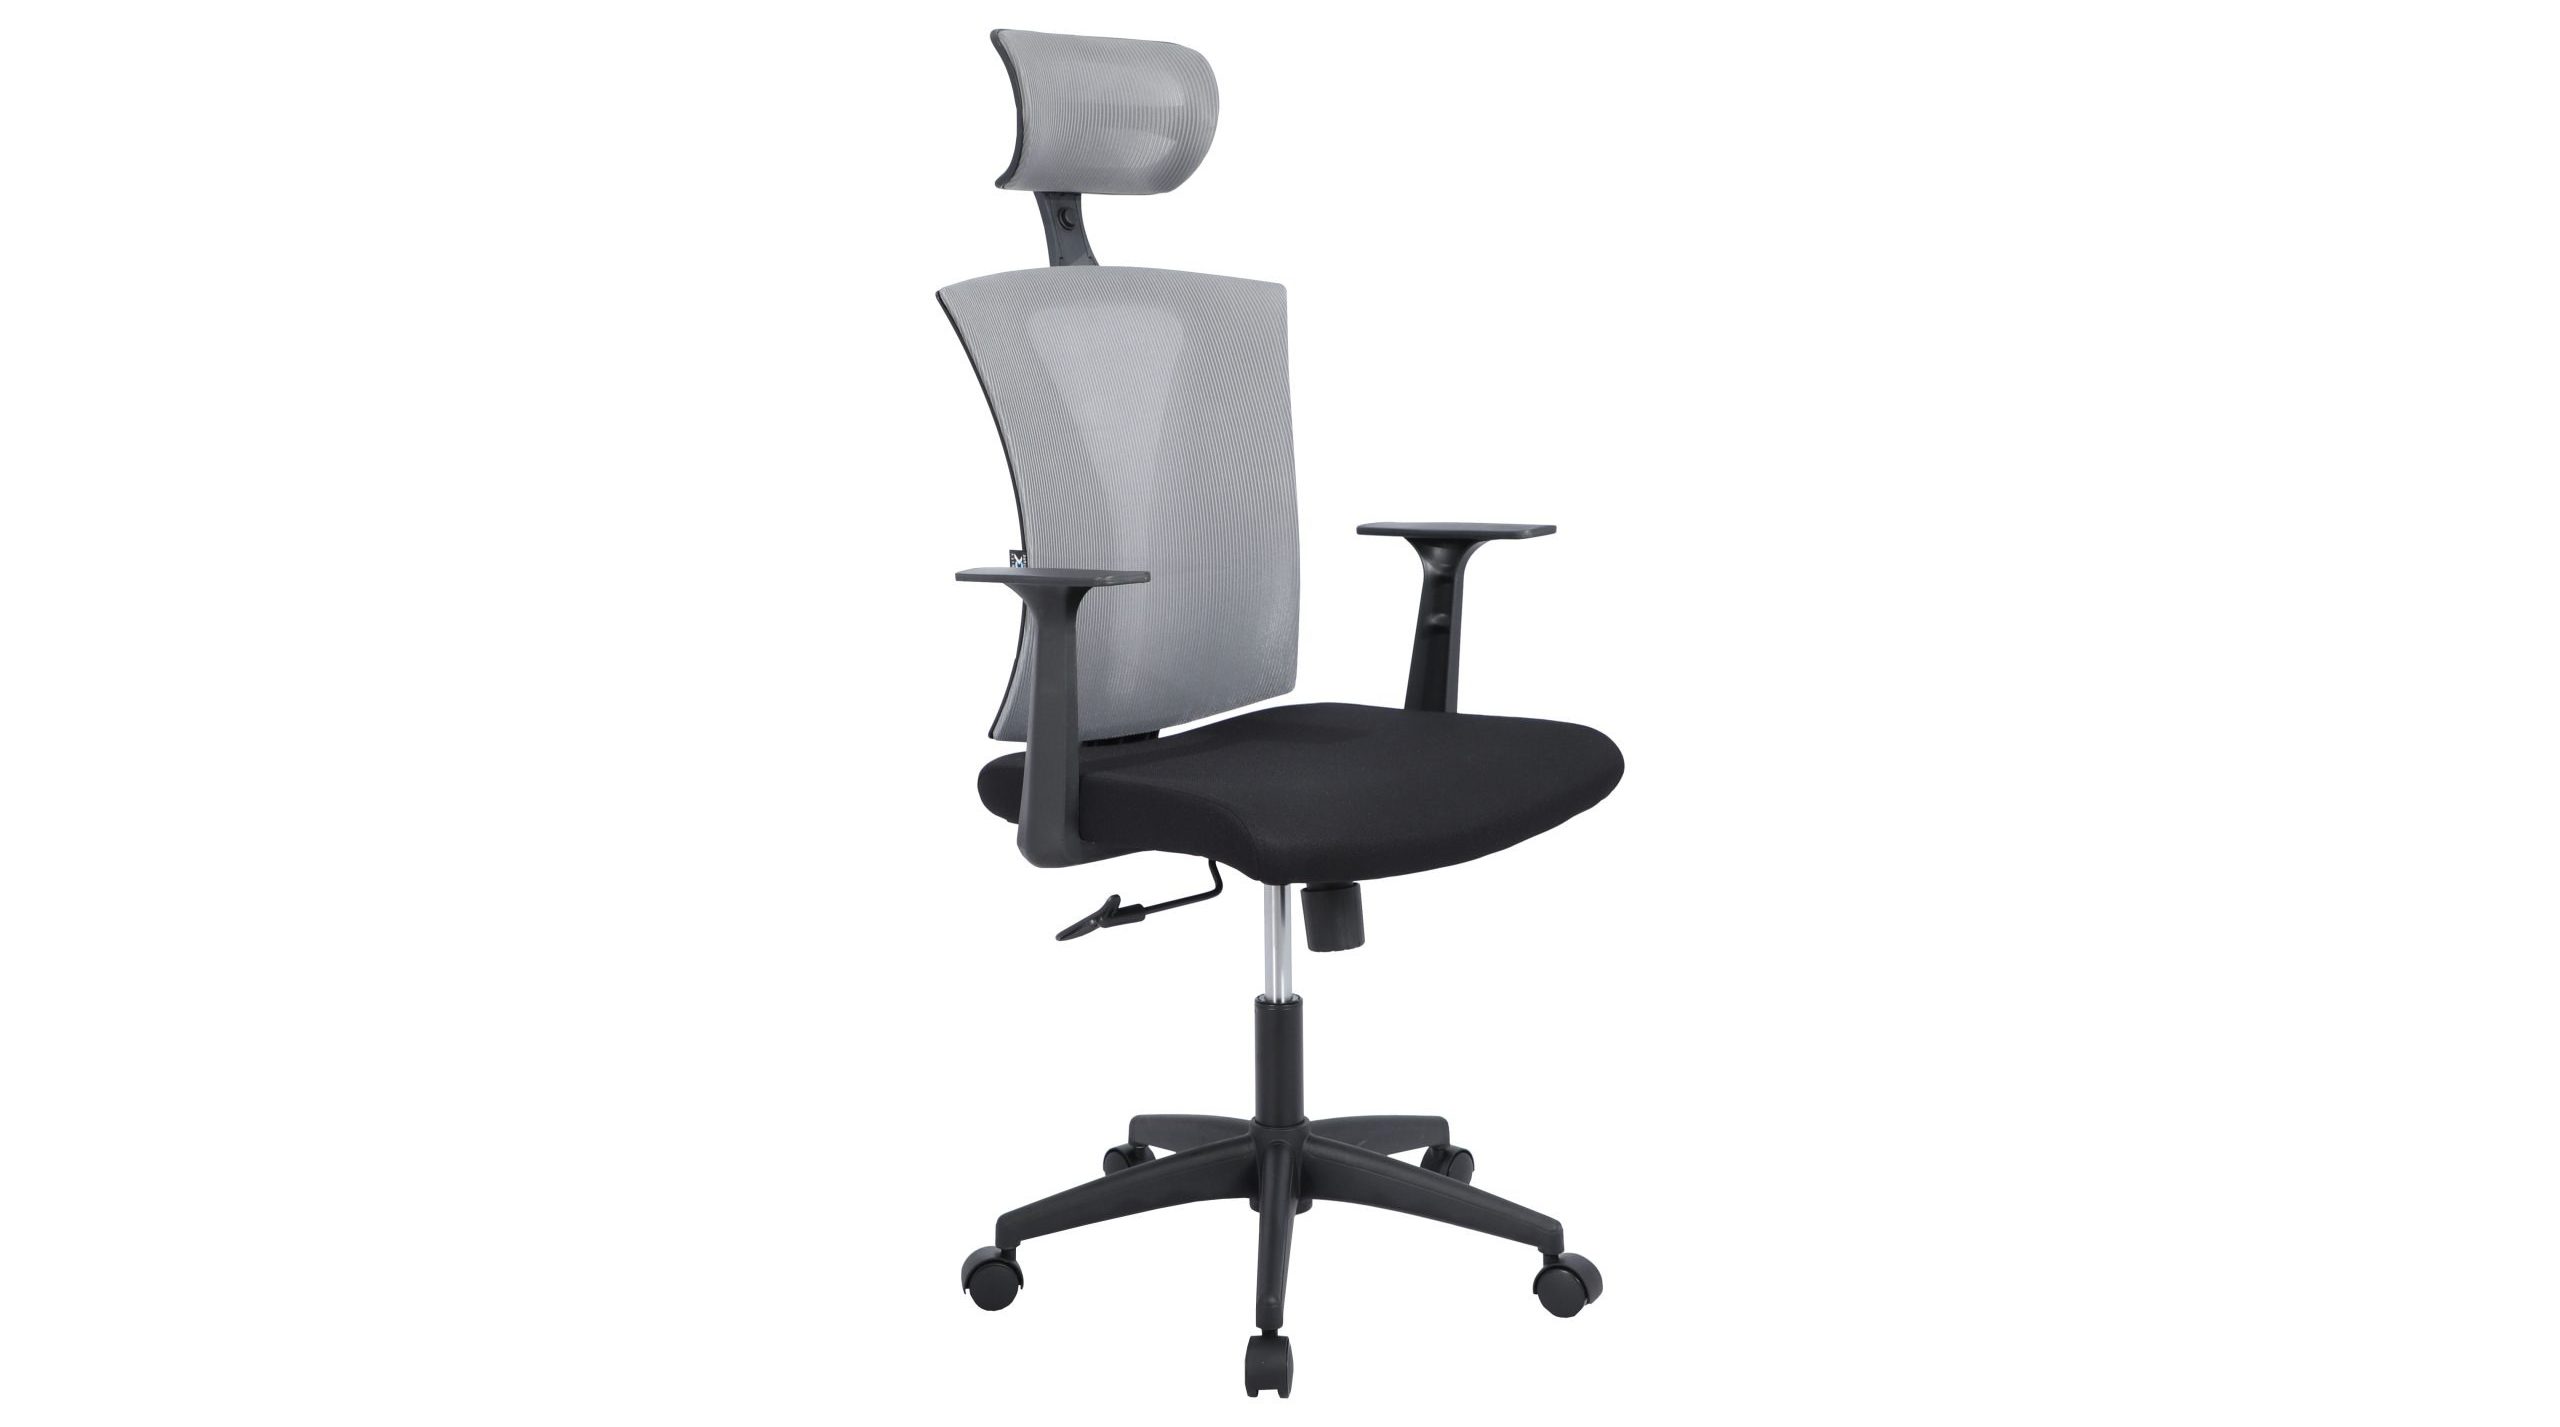 High Back Task Chair is available in Kisii